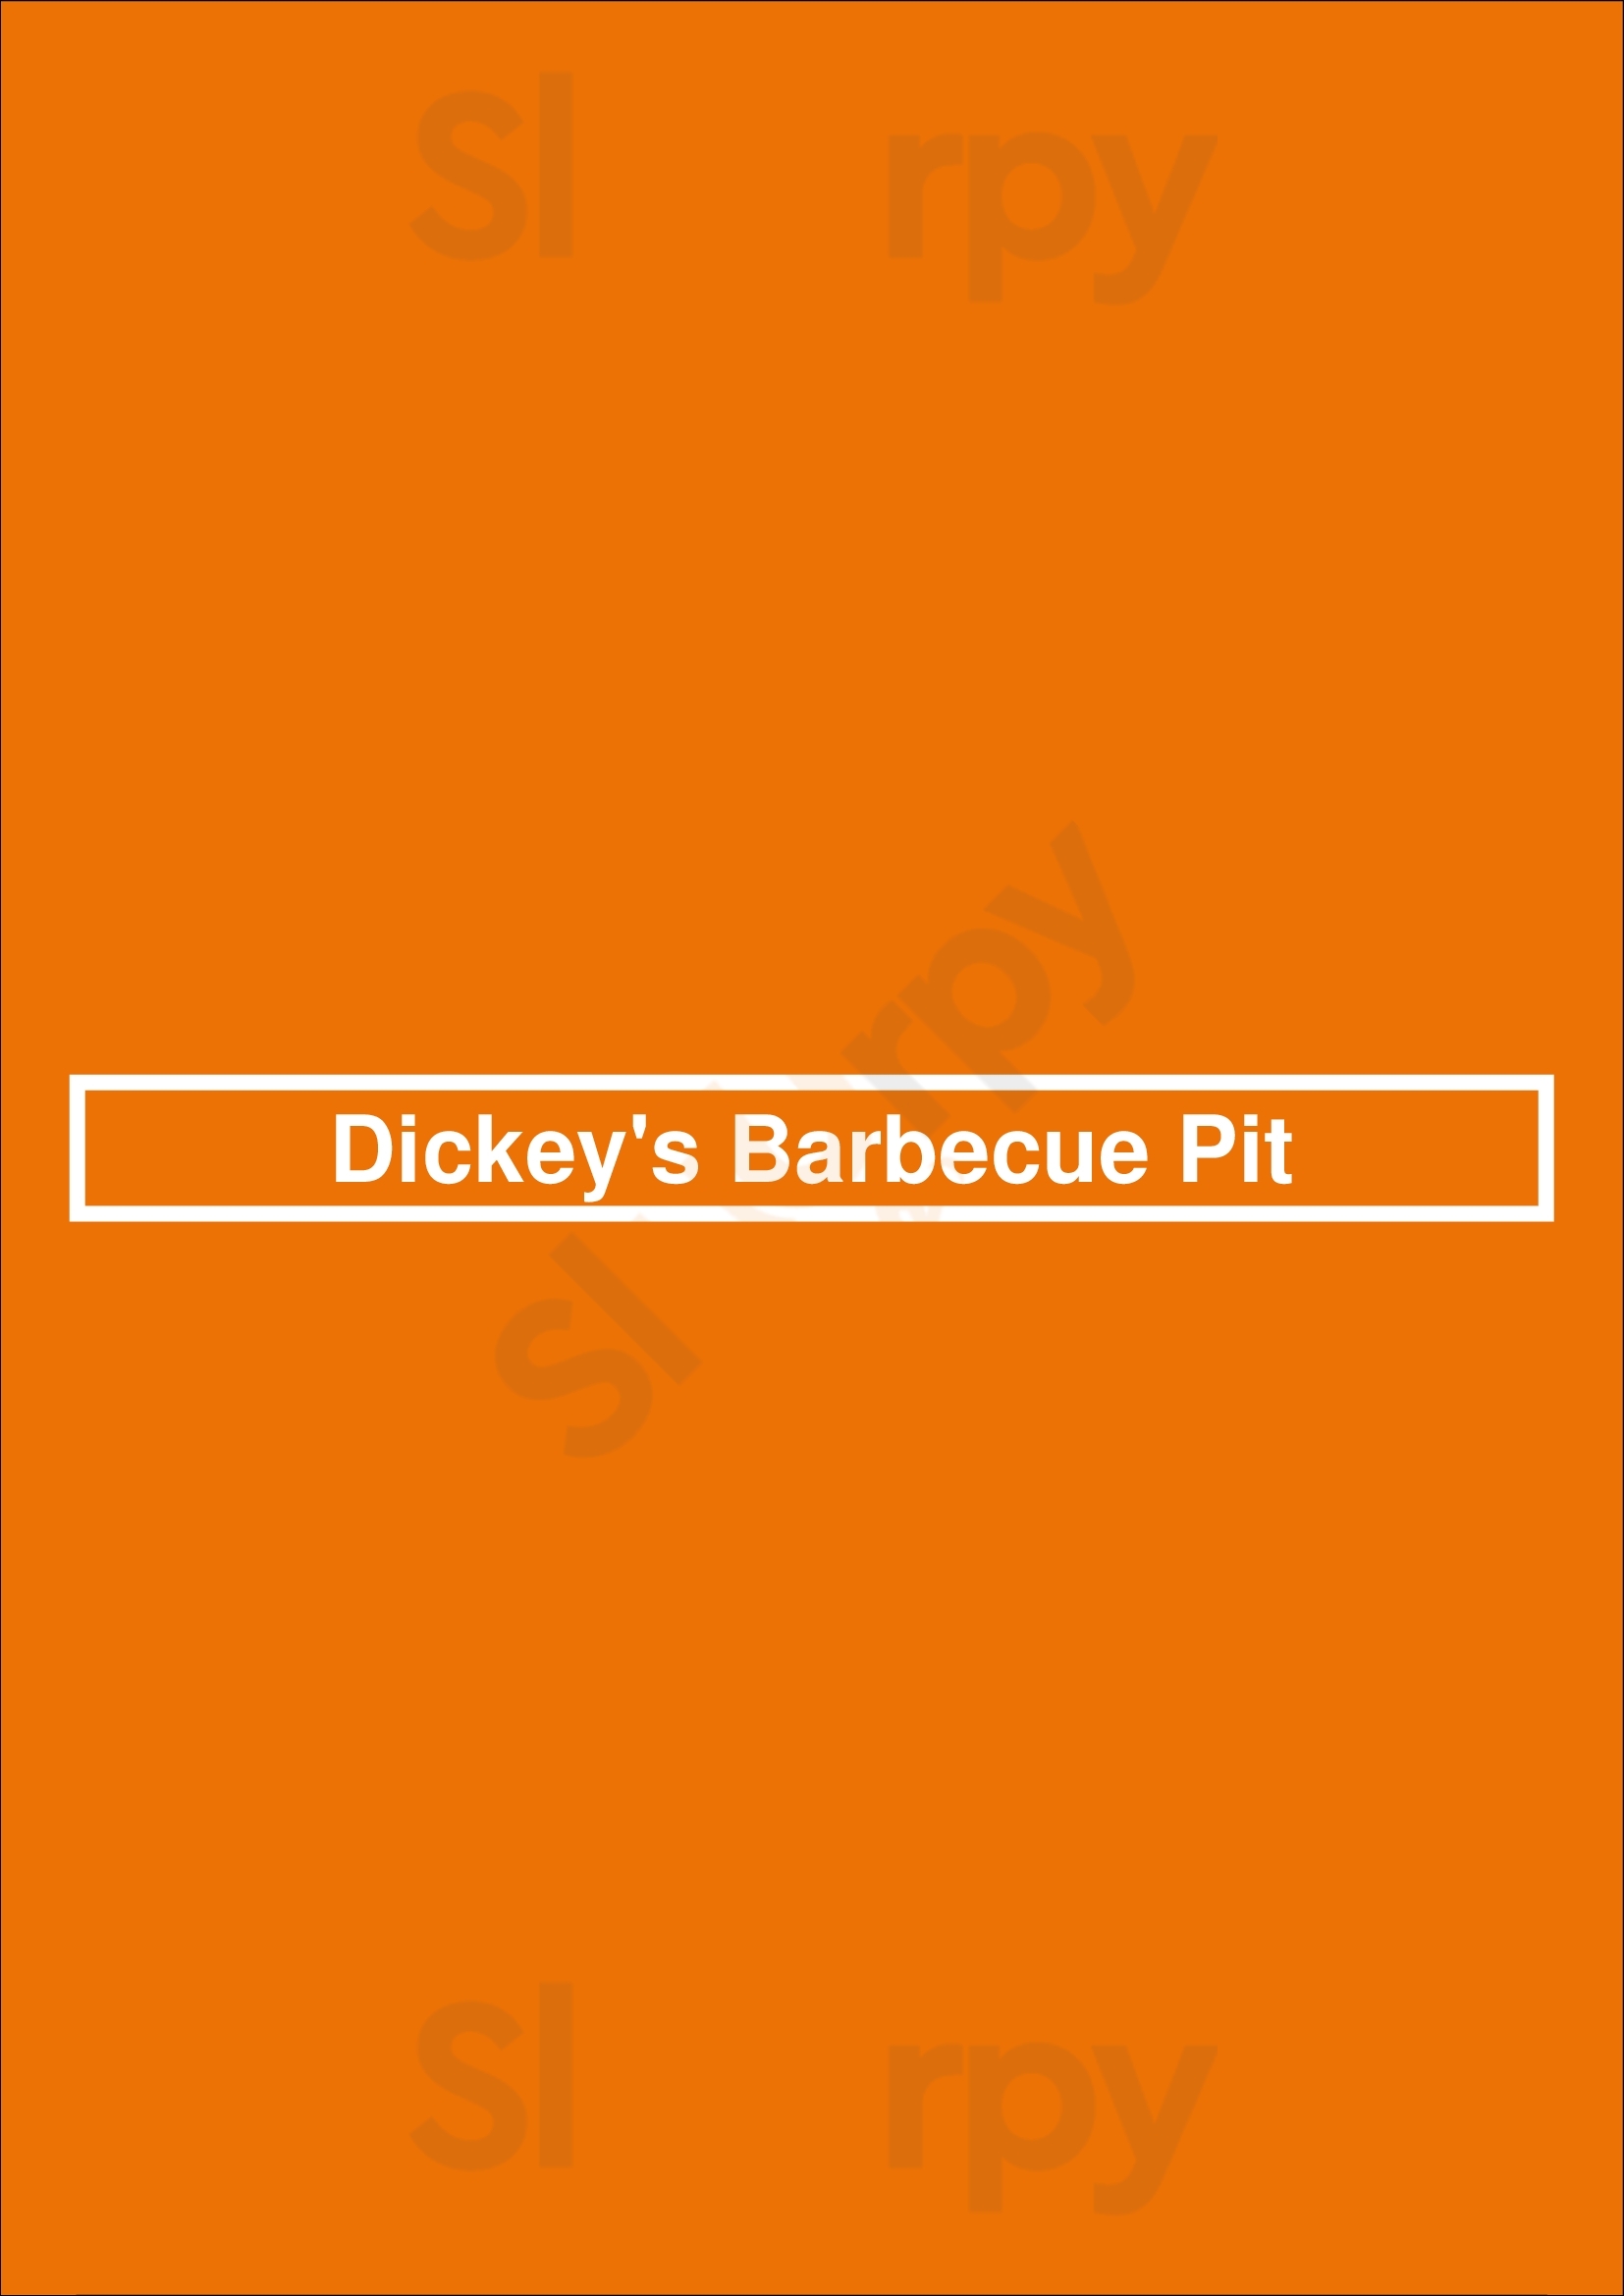 Dickey's Barbecue Pit Knoxville Menu - 1